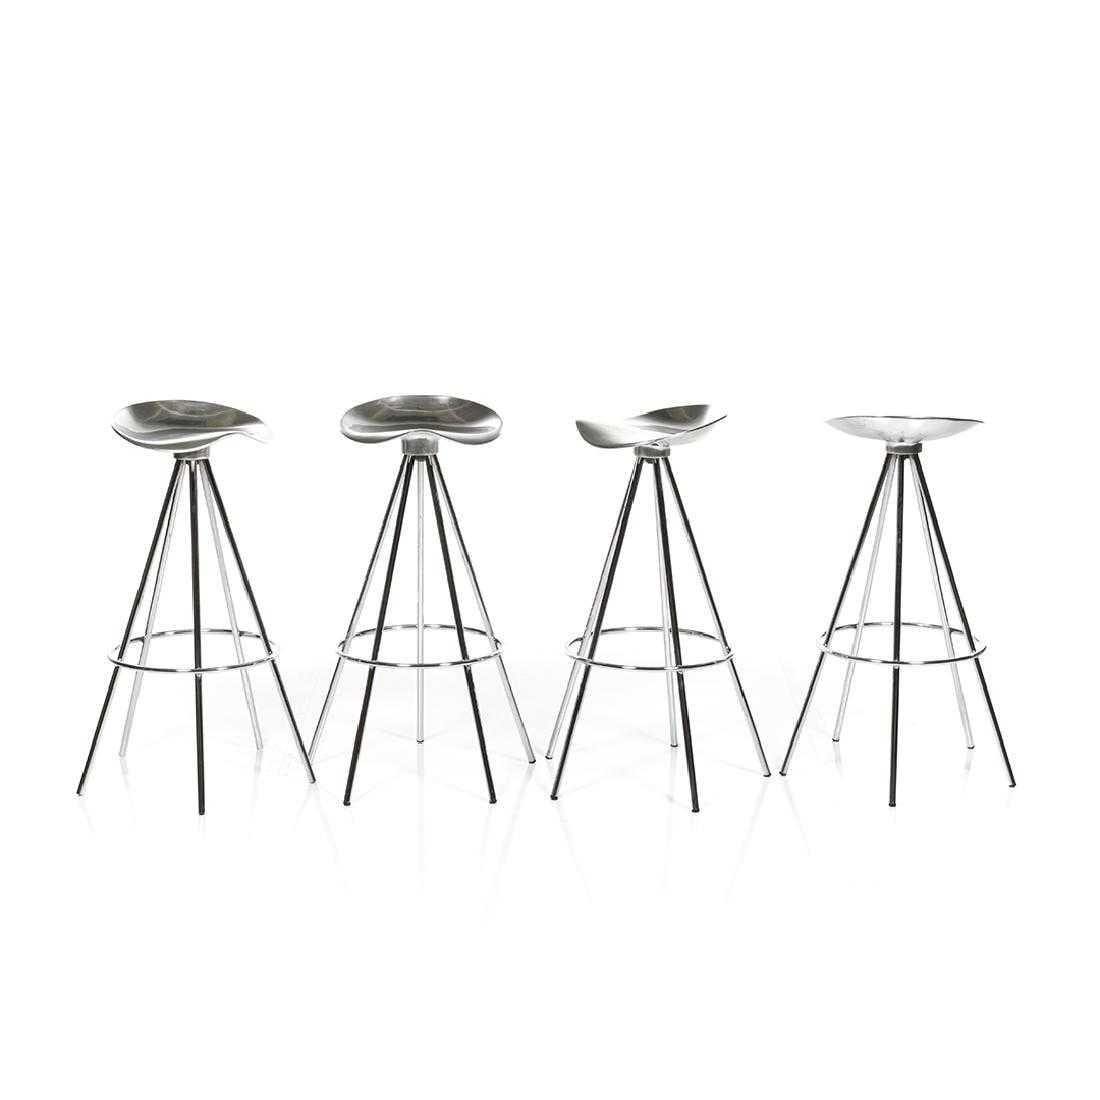 Set of four aluminum and chrome Jamaica stools by Pepe Cortes for Knoll, Spain, 1990.
  